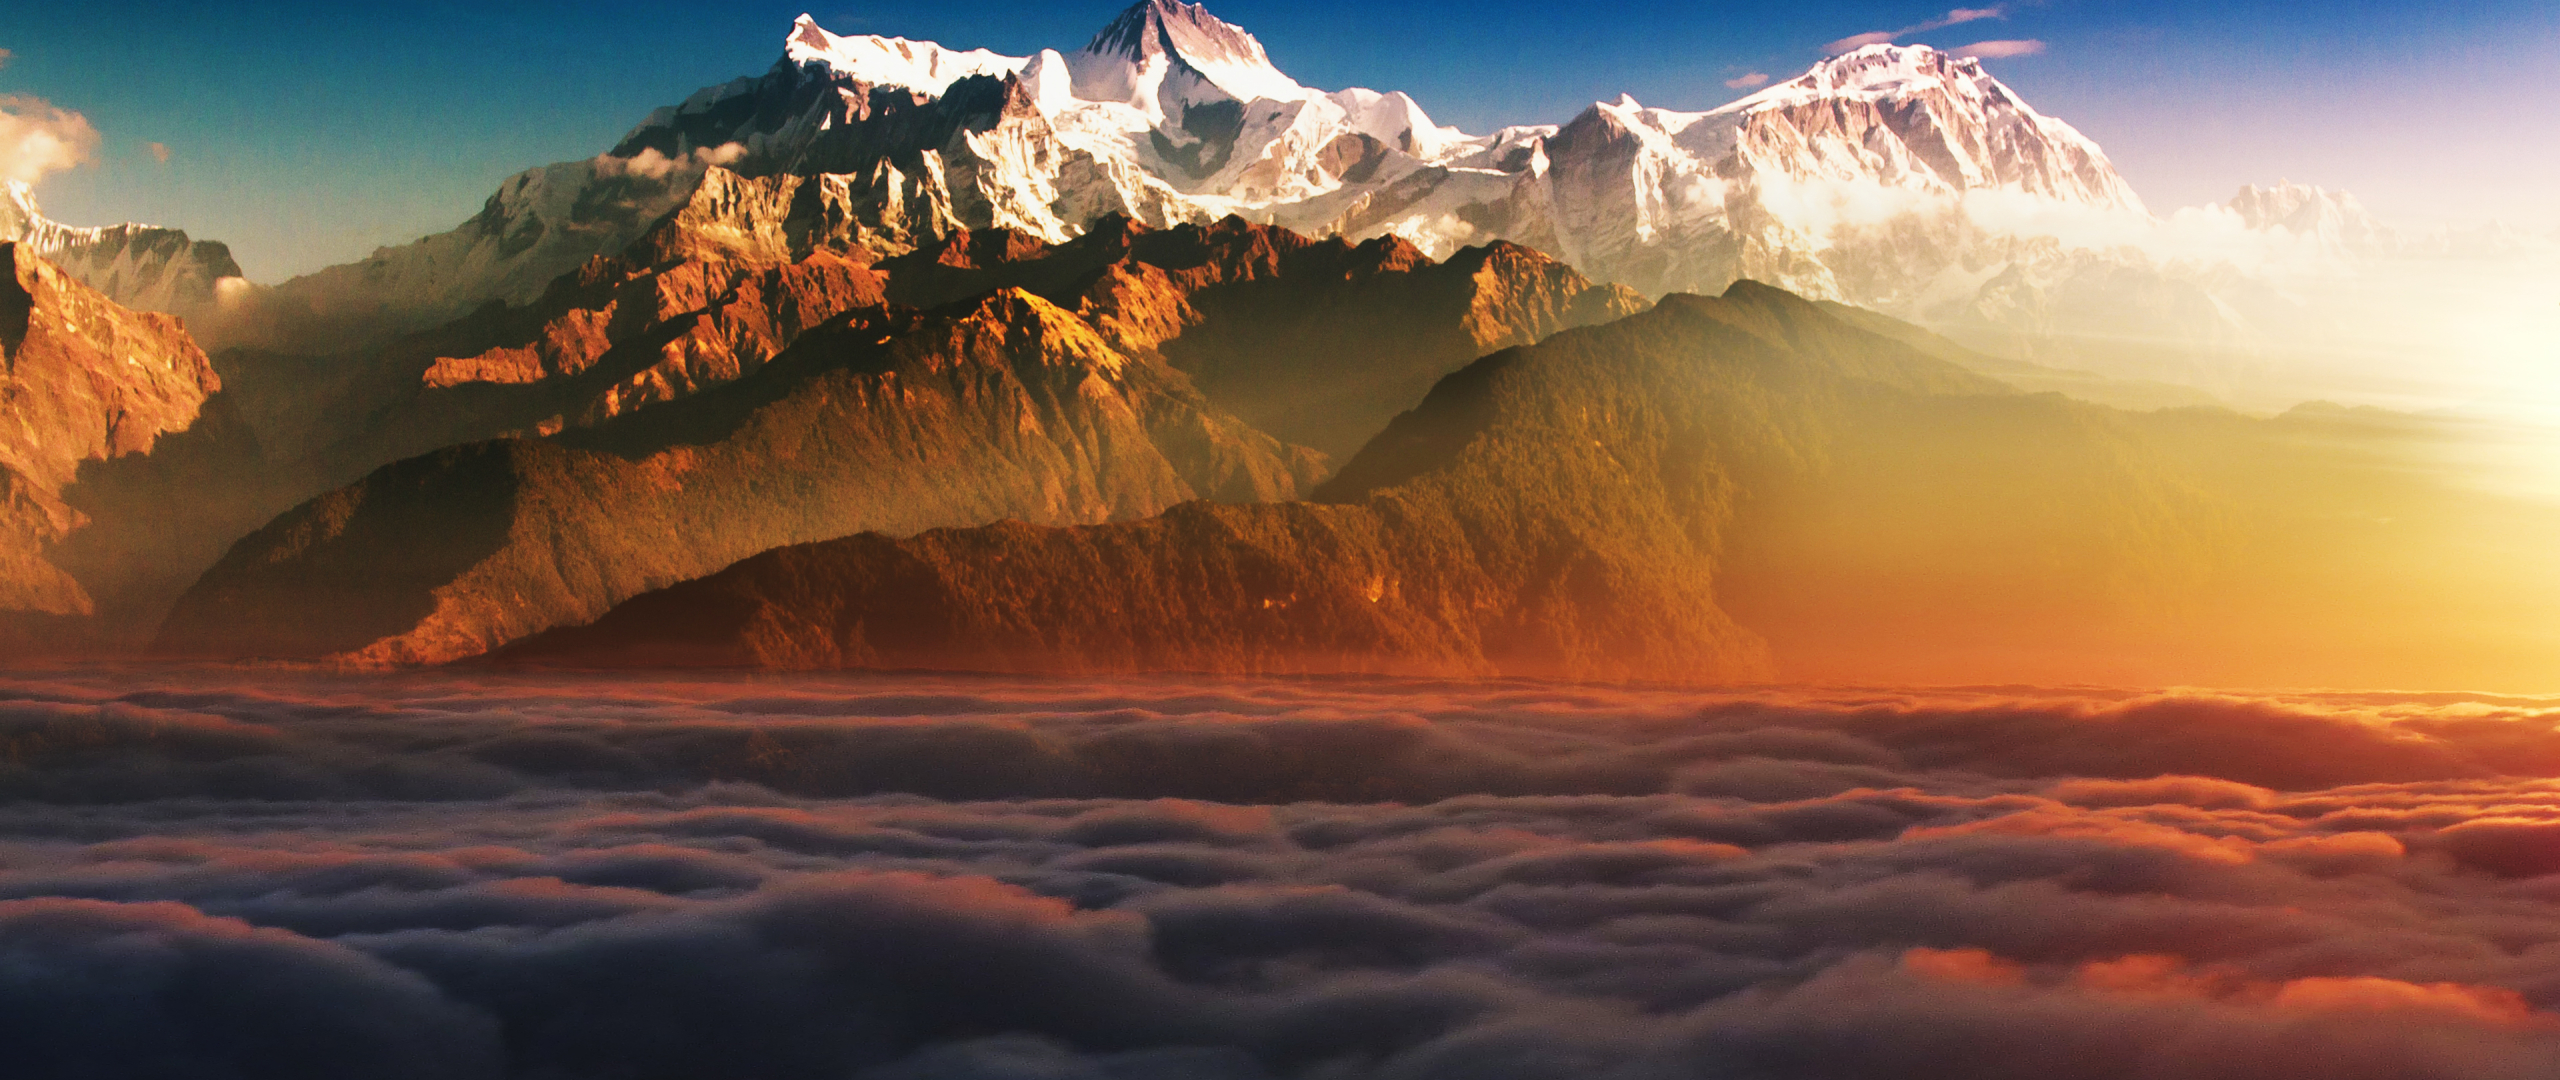 mountains-in-clouds_64418_2560x1080.jpg